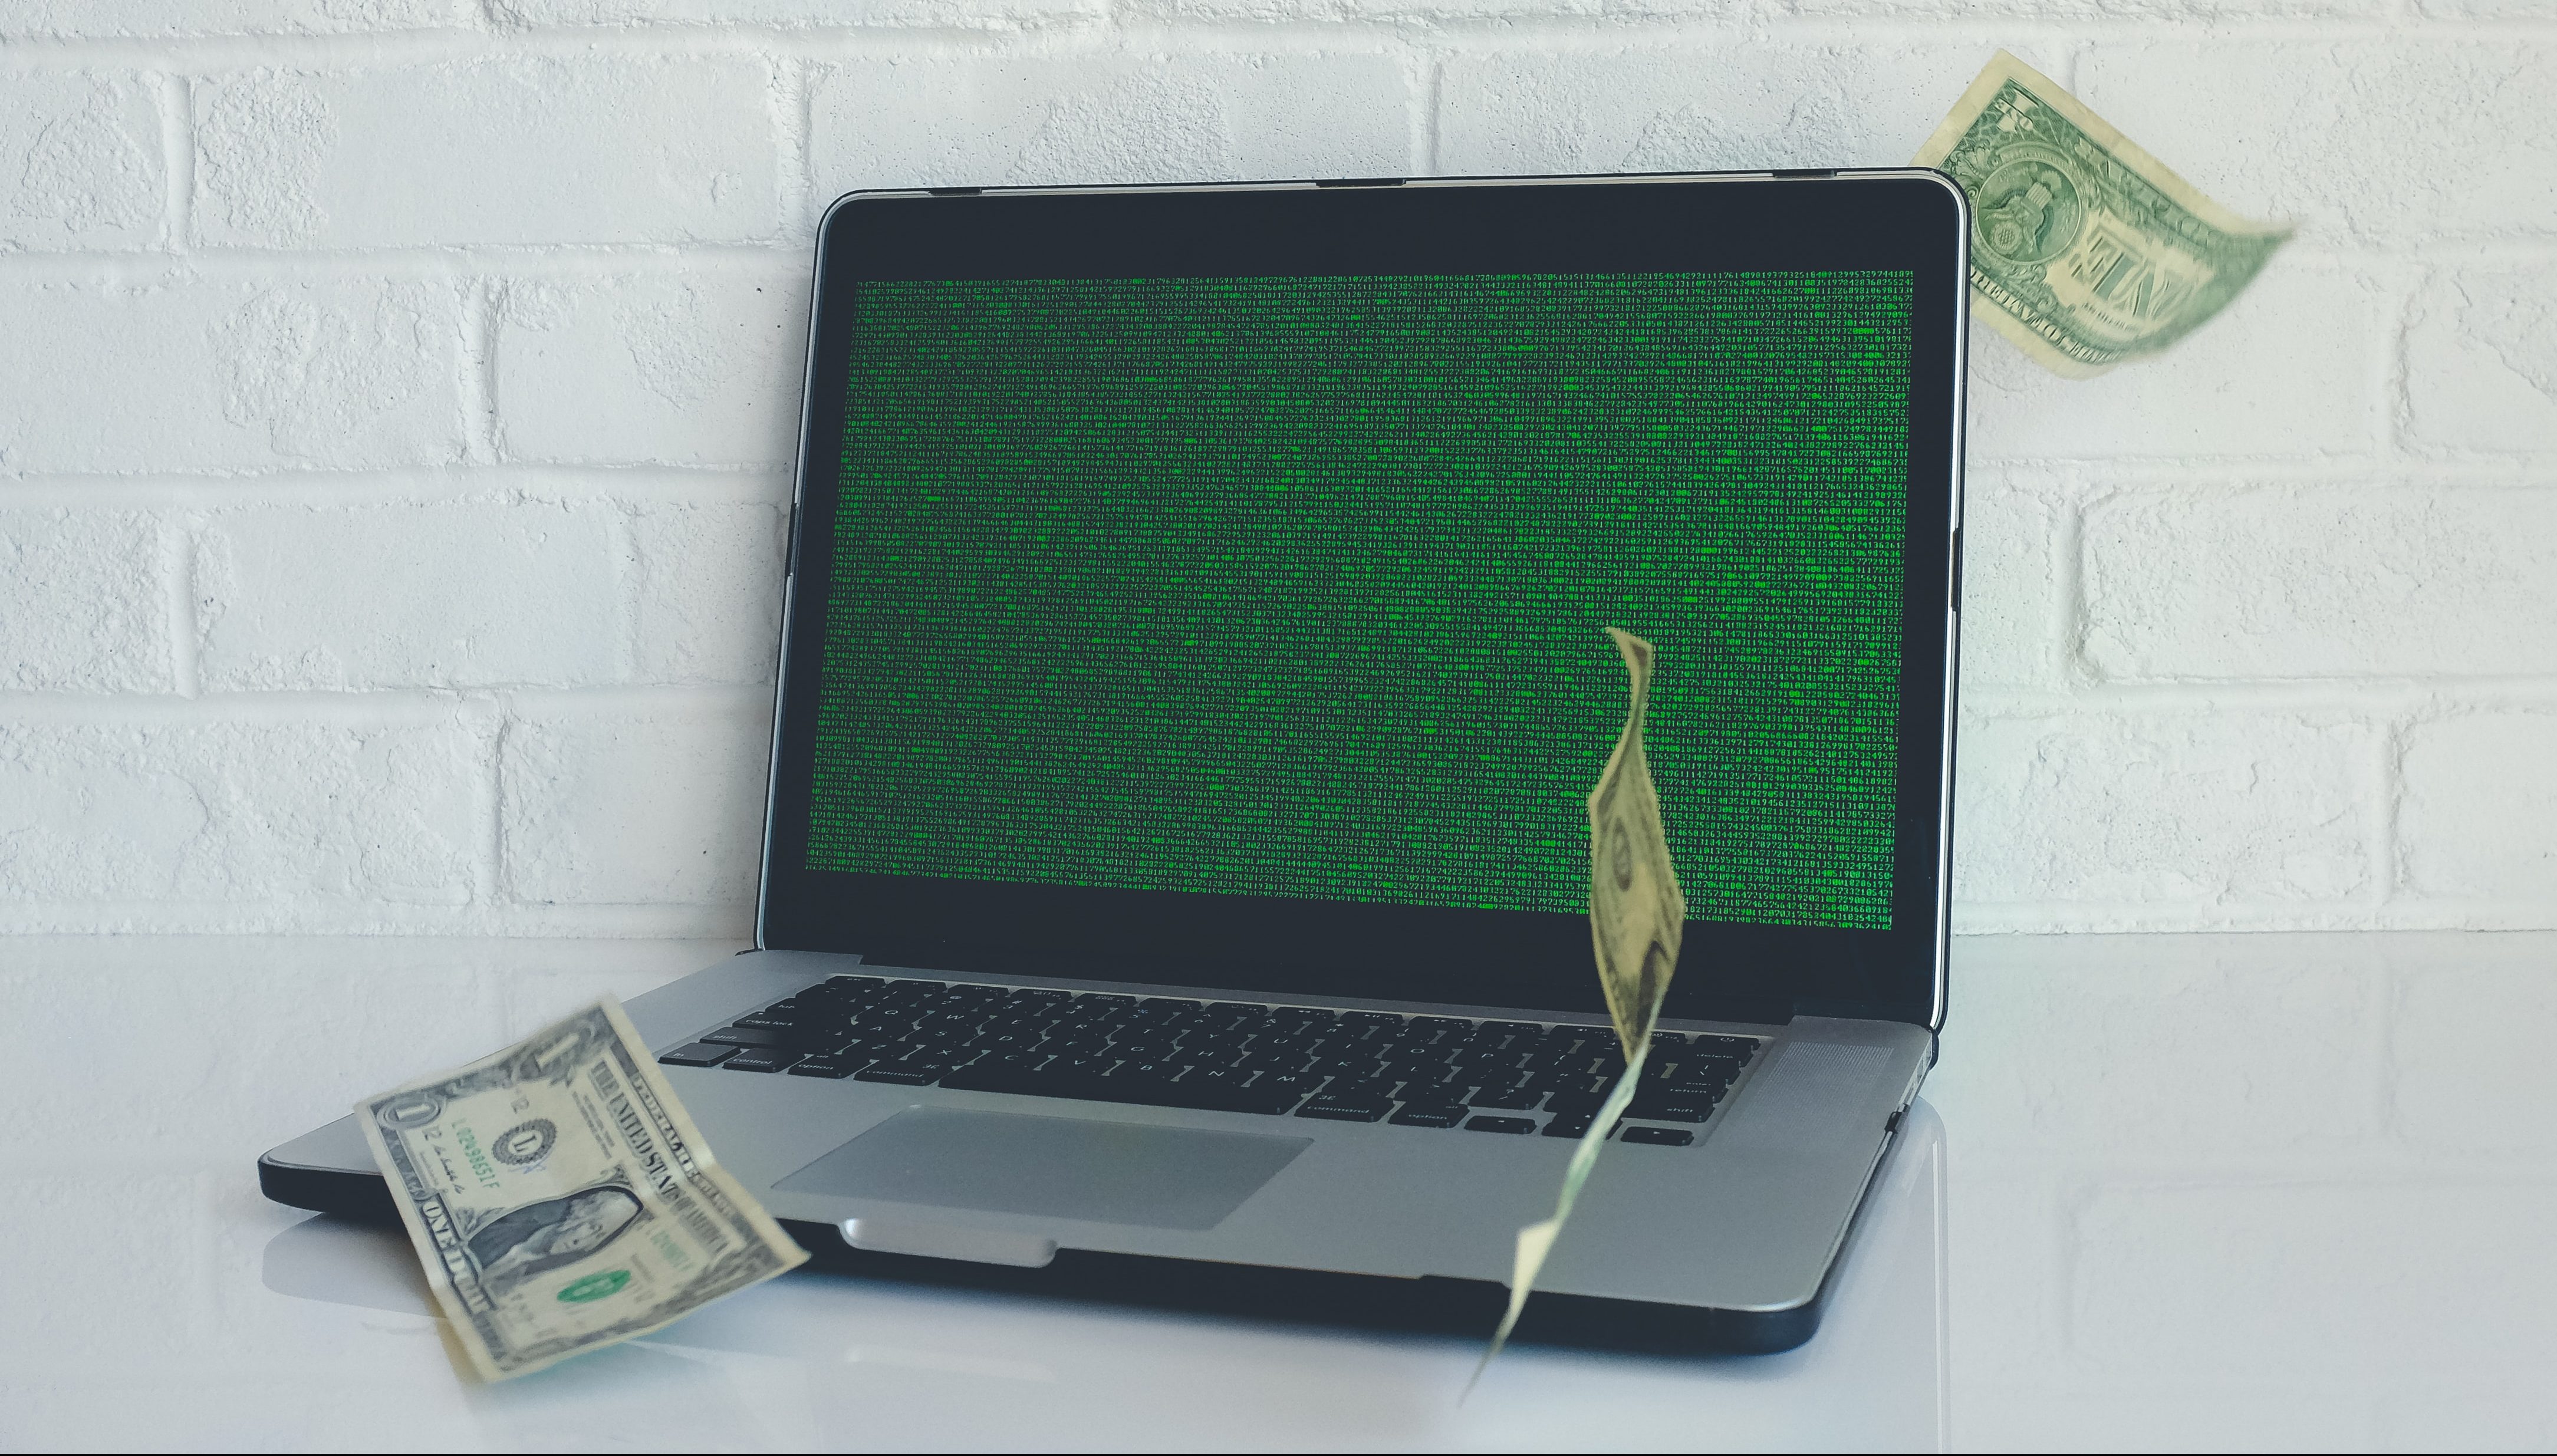 image of a laptop computer with dollar bills falling around it, symbolizing profit from technology. Photo by NeONBRAND on Unsplash.